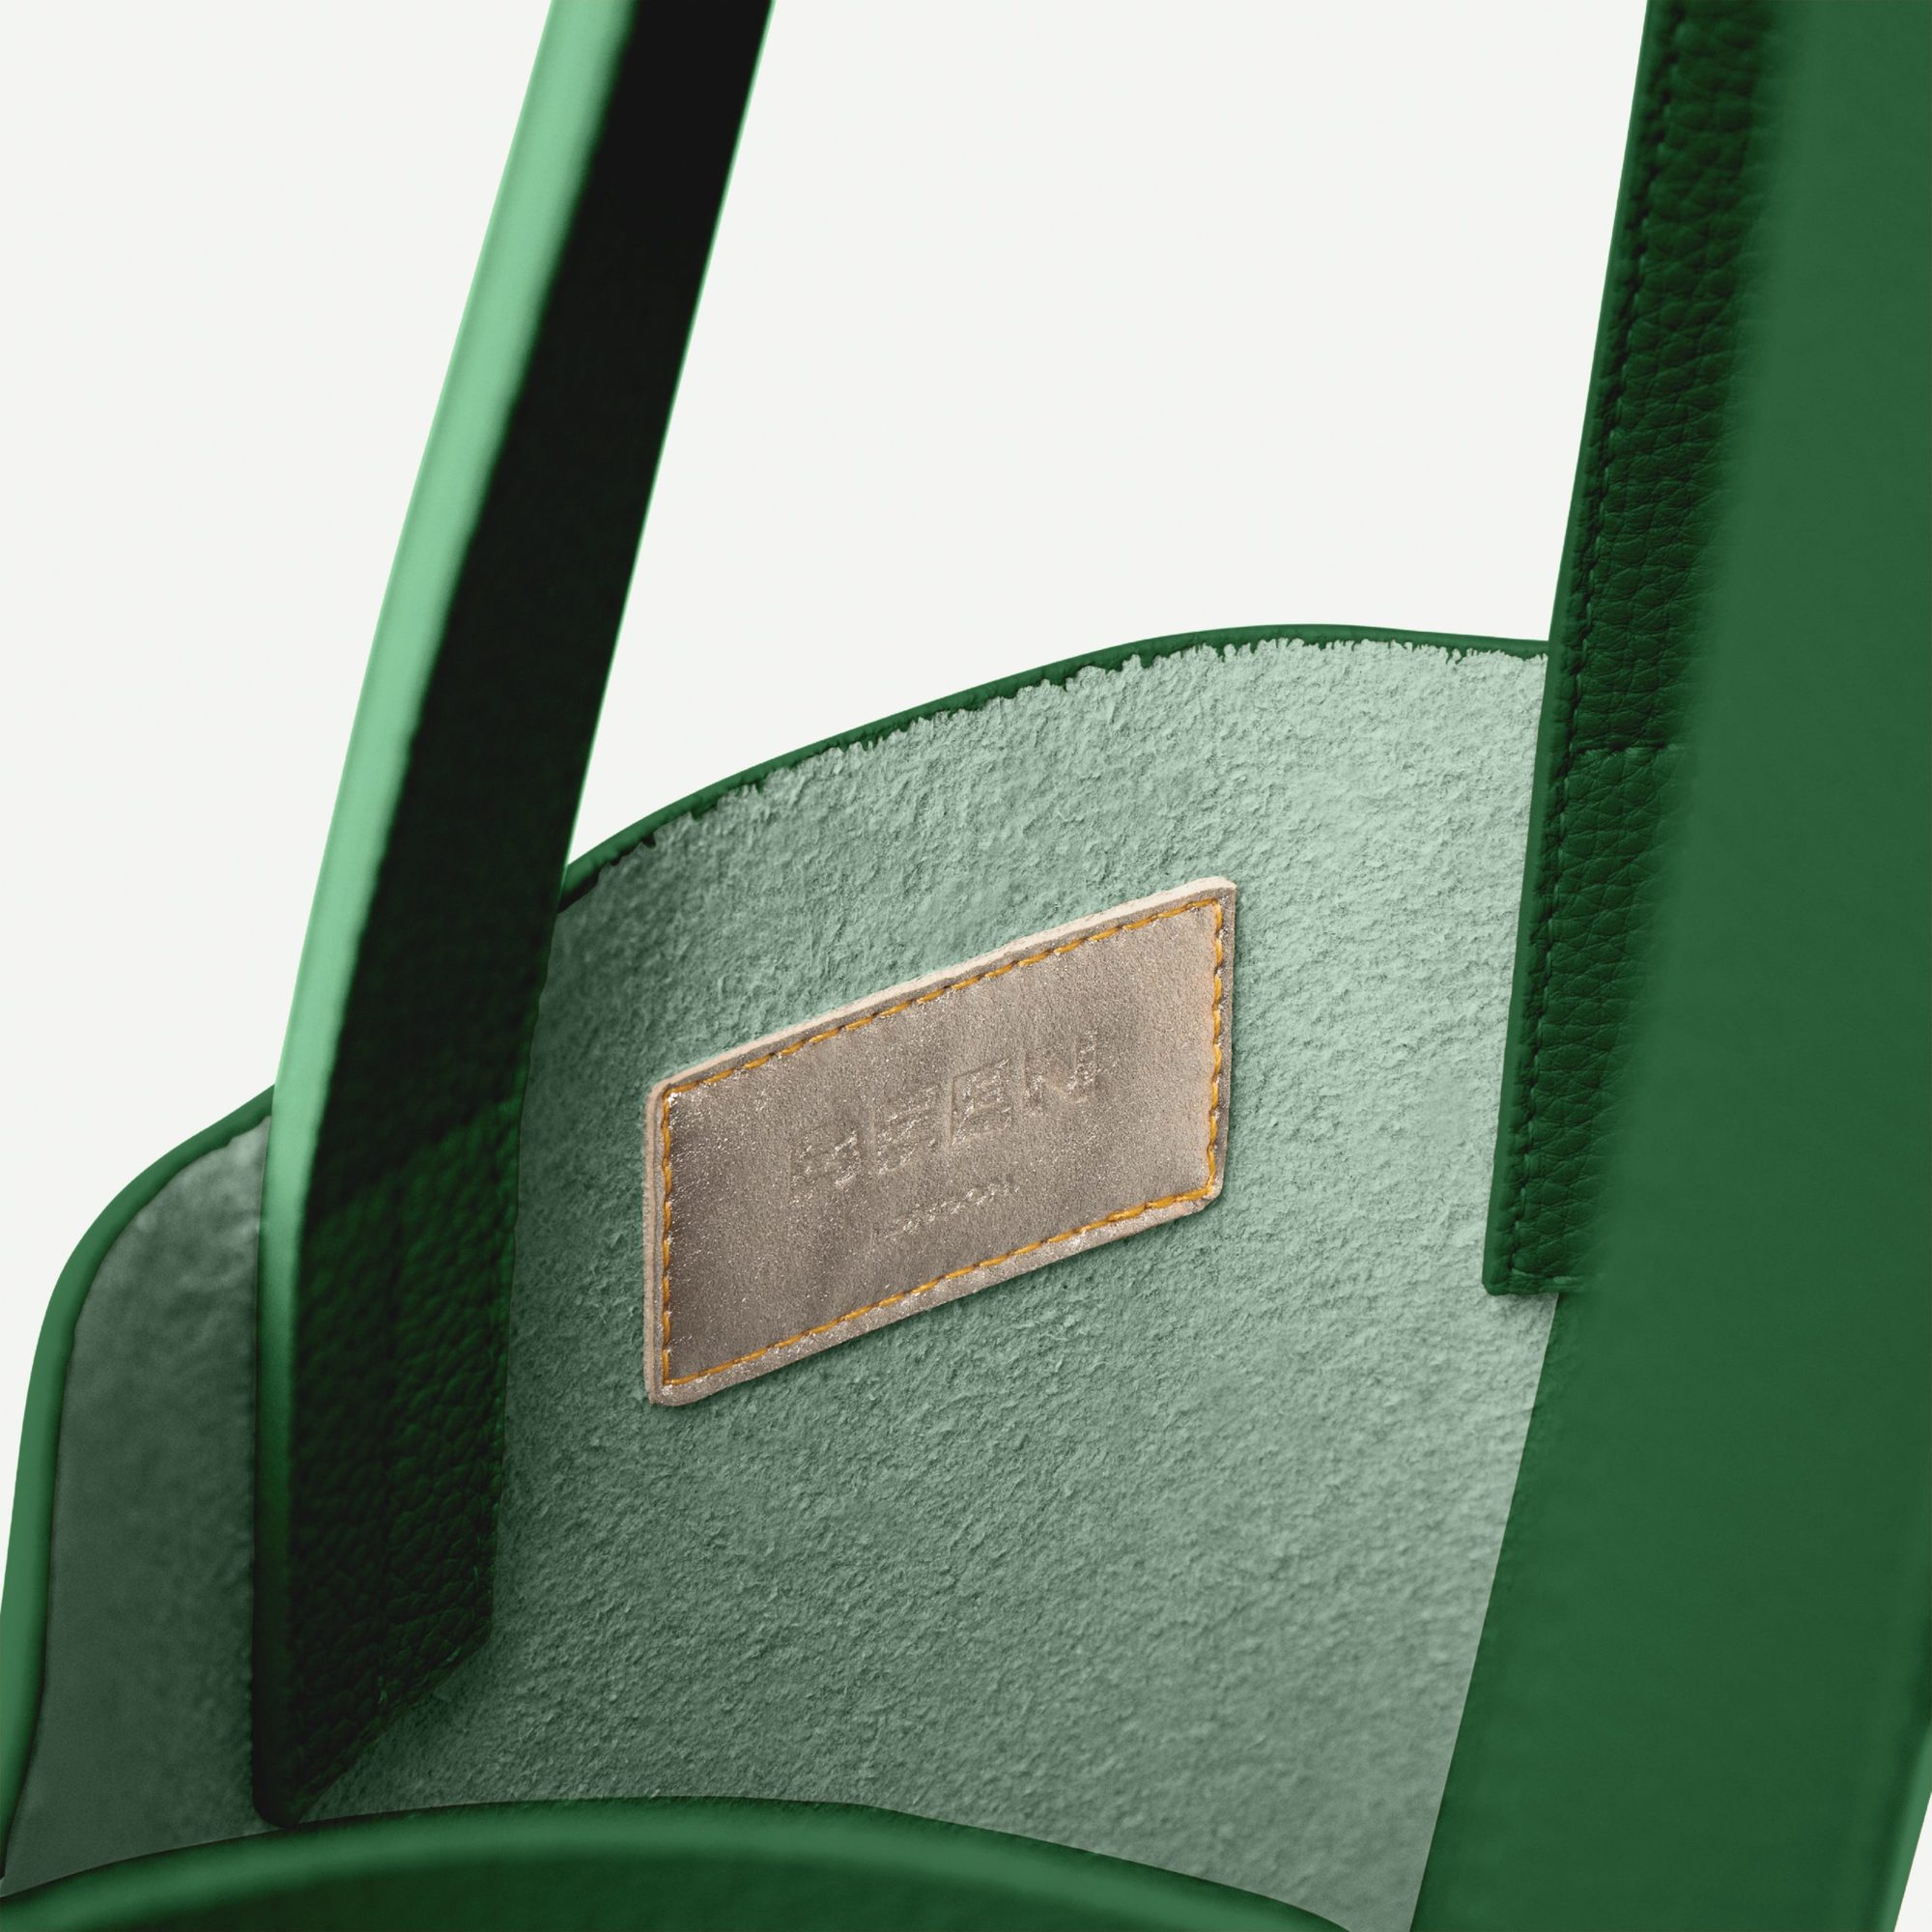 East Tote - Rainforest Green